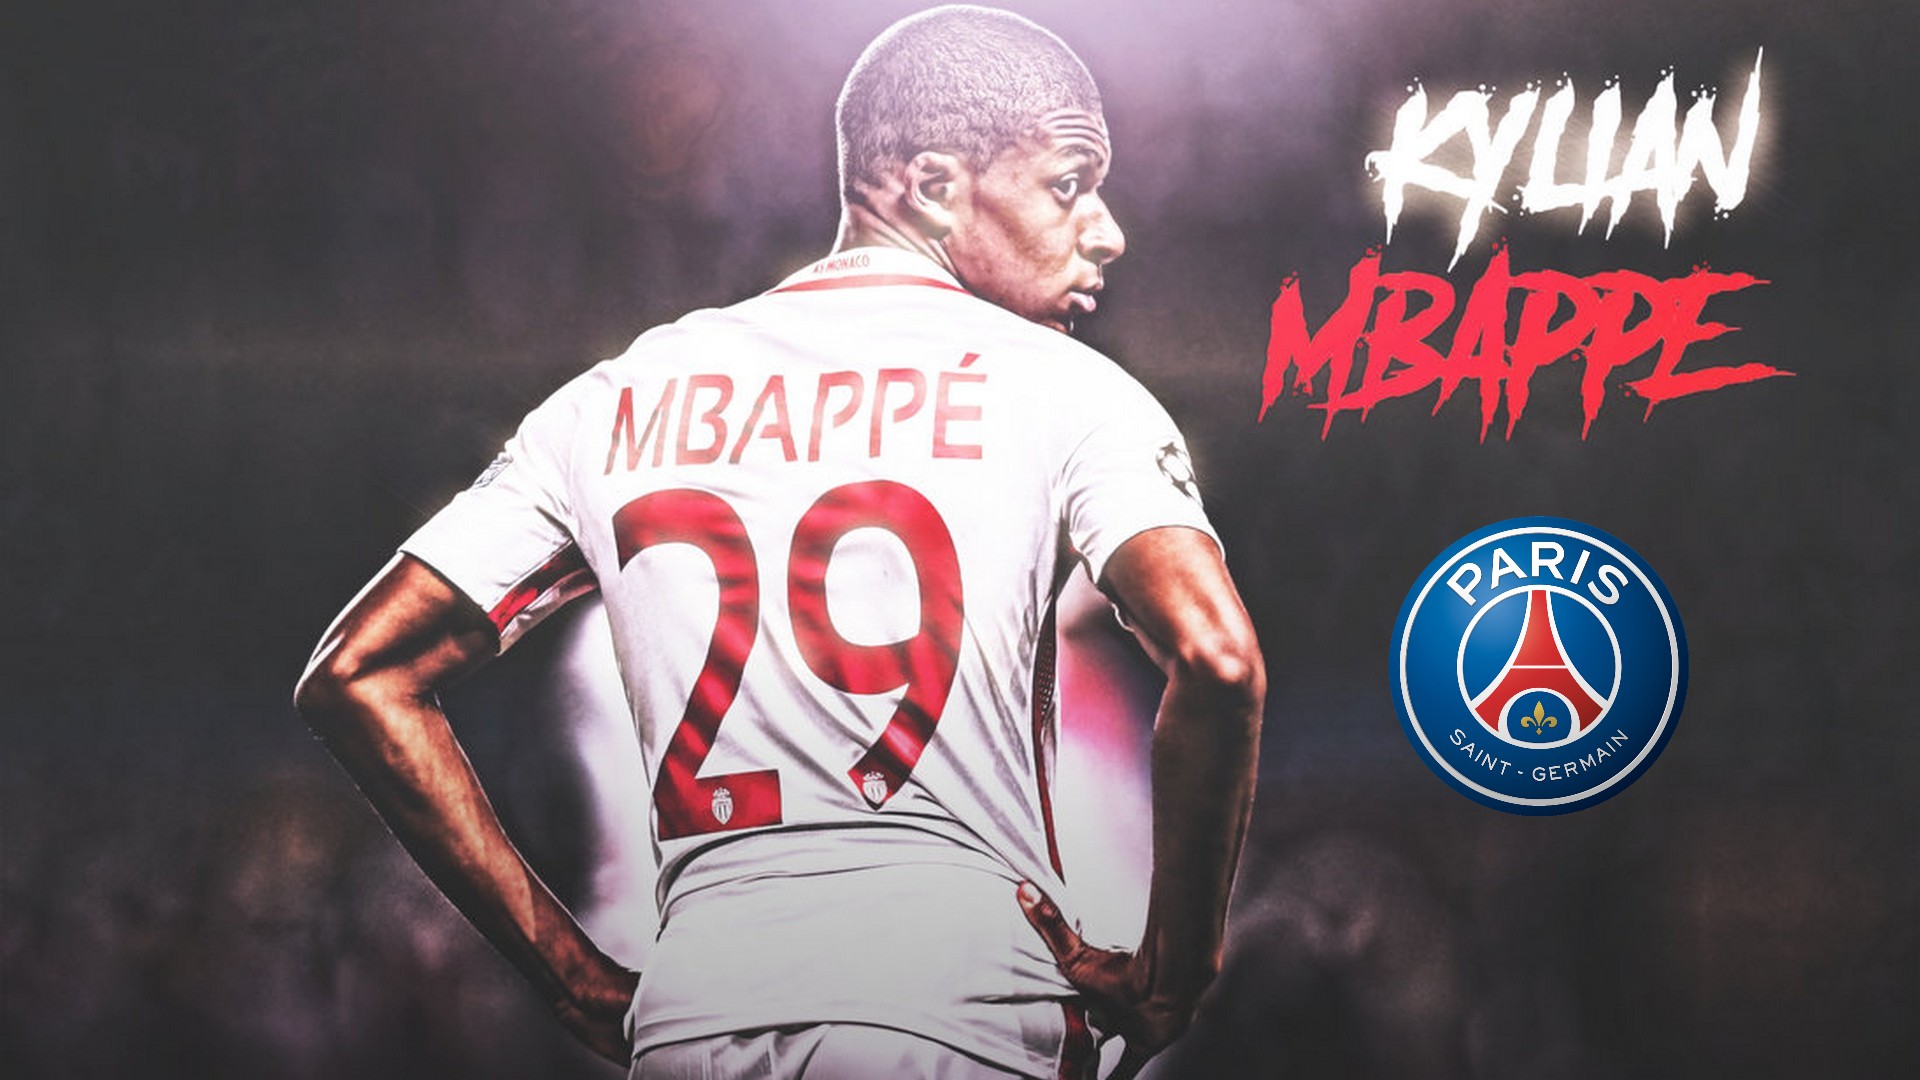 Kylian Mbappe PSG Wallpaper with resolution 1920x1080 pixel. You can make this wallpaper for your Mac or Windows Desktop Background, iPhone, Android or Tablet and another Smartphone device